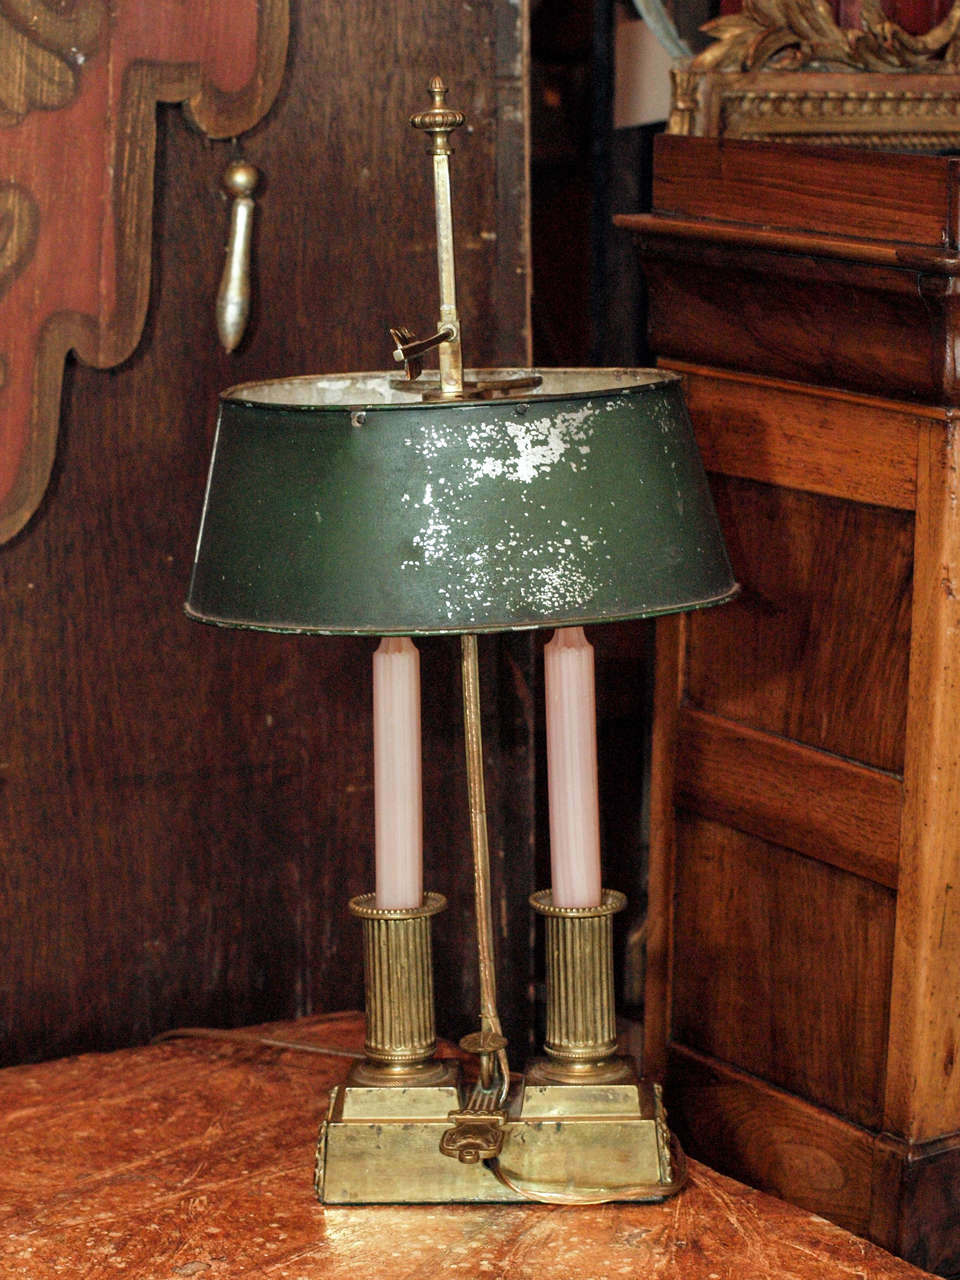 Mid 19th century French bronze bouillotte lamp with oval tole shade with a rectangular base with swags on 3 sides, 2 fluted columns for candles, and carrying handle. US wired with 2 candelabra lights inside the oval shade.